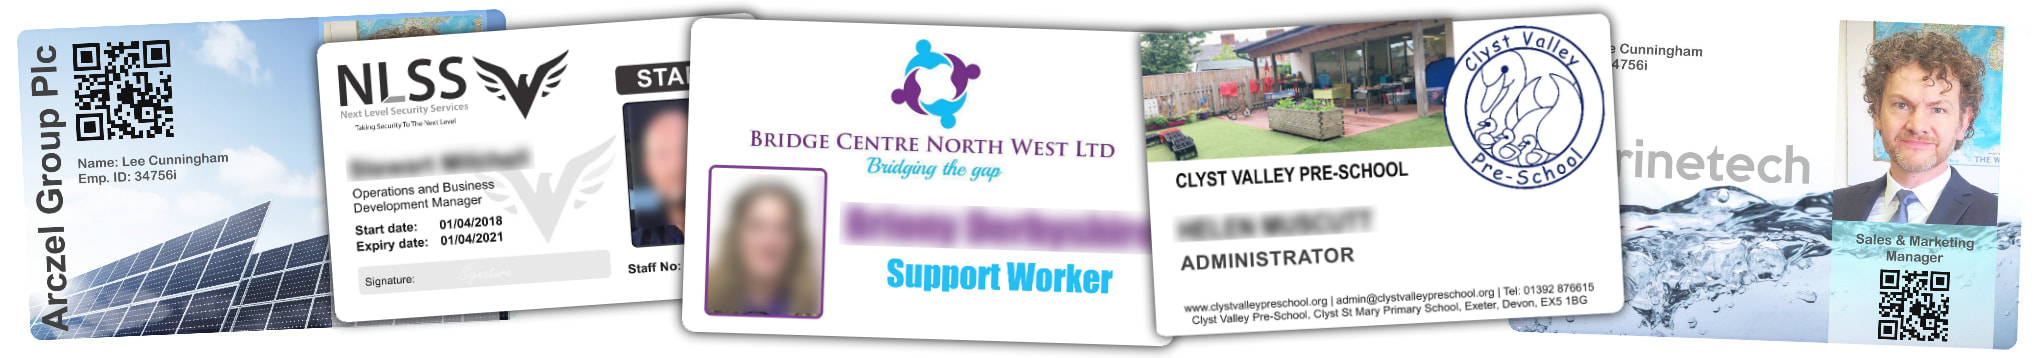 Dundee Scotland examples of staff photo ID cards | samples of employee Identity card printing | Workers ID cards printed in 